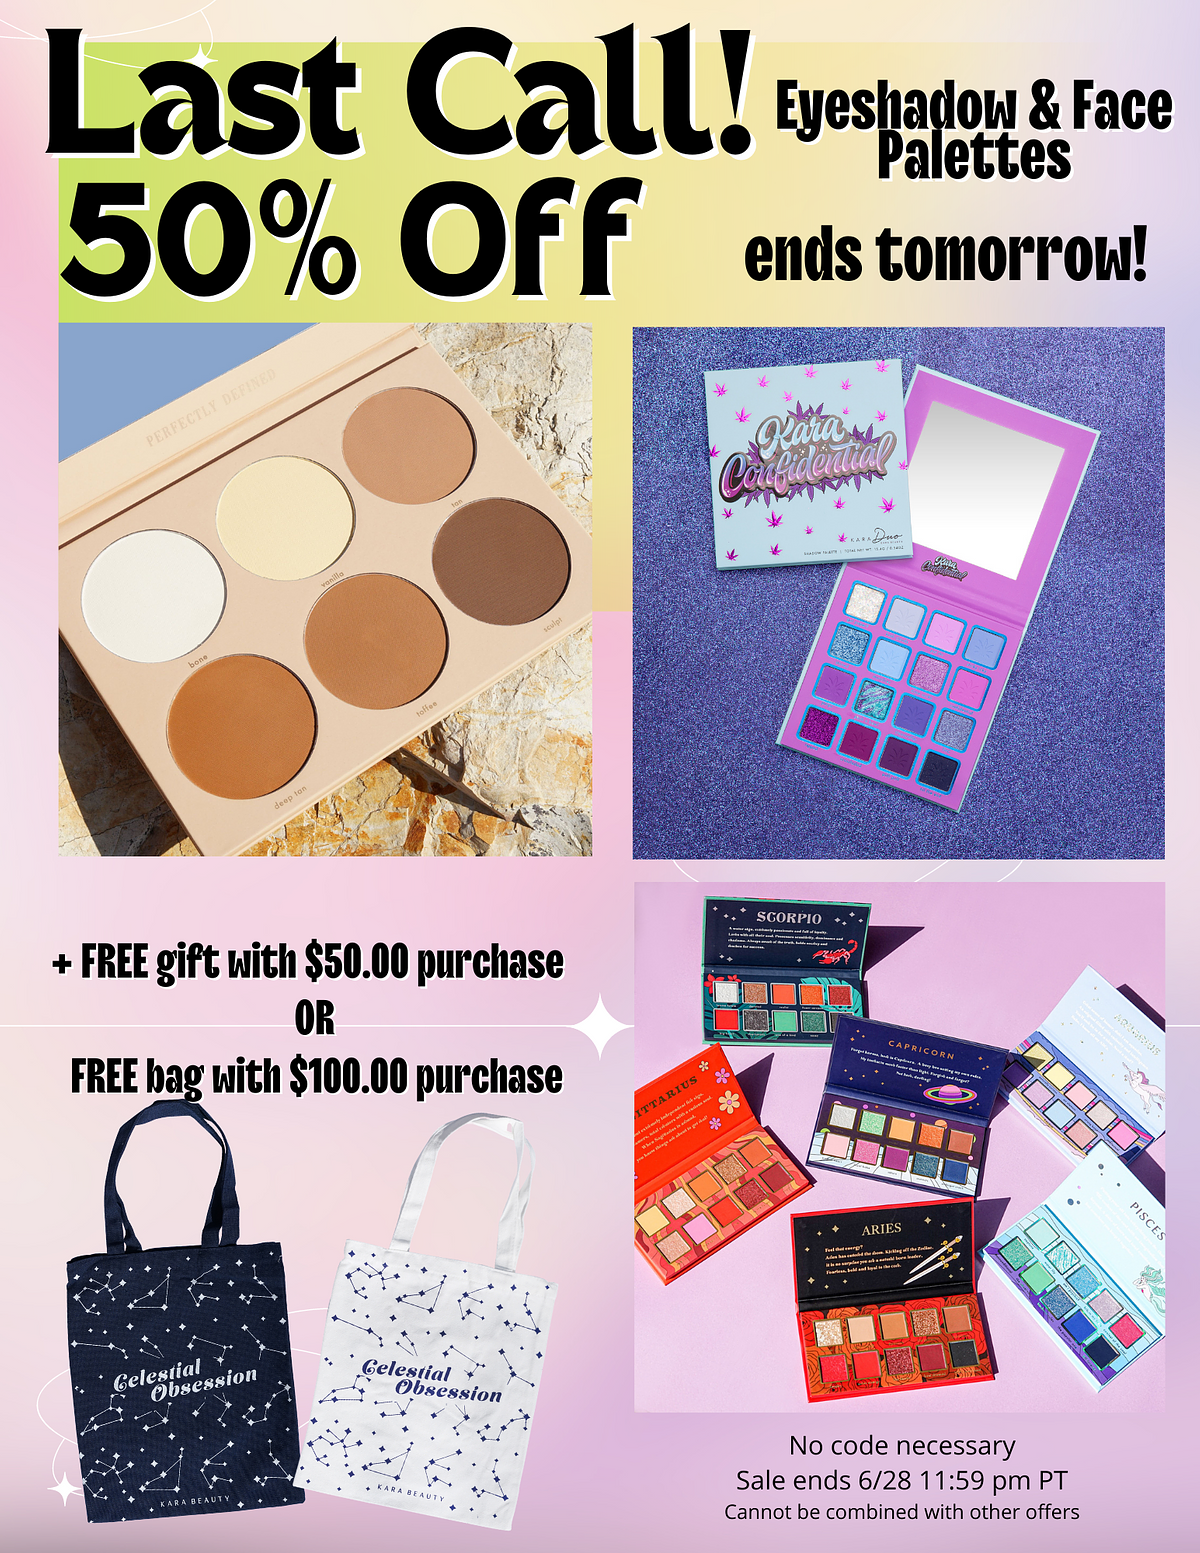  all! Eyesyadou Face ettes f f ends tomorrou! FREE gift with $50.00 purchase OR FREE hag with $100.00 purchase b R b eg:::;'" - N Rl No code necessary Sale ends 628 11:59 pm PT Cannot be combined with other offers 